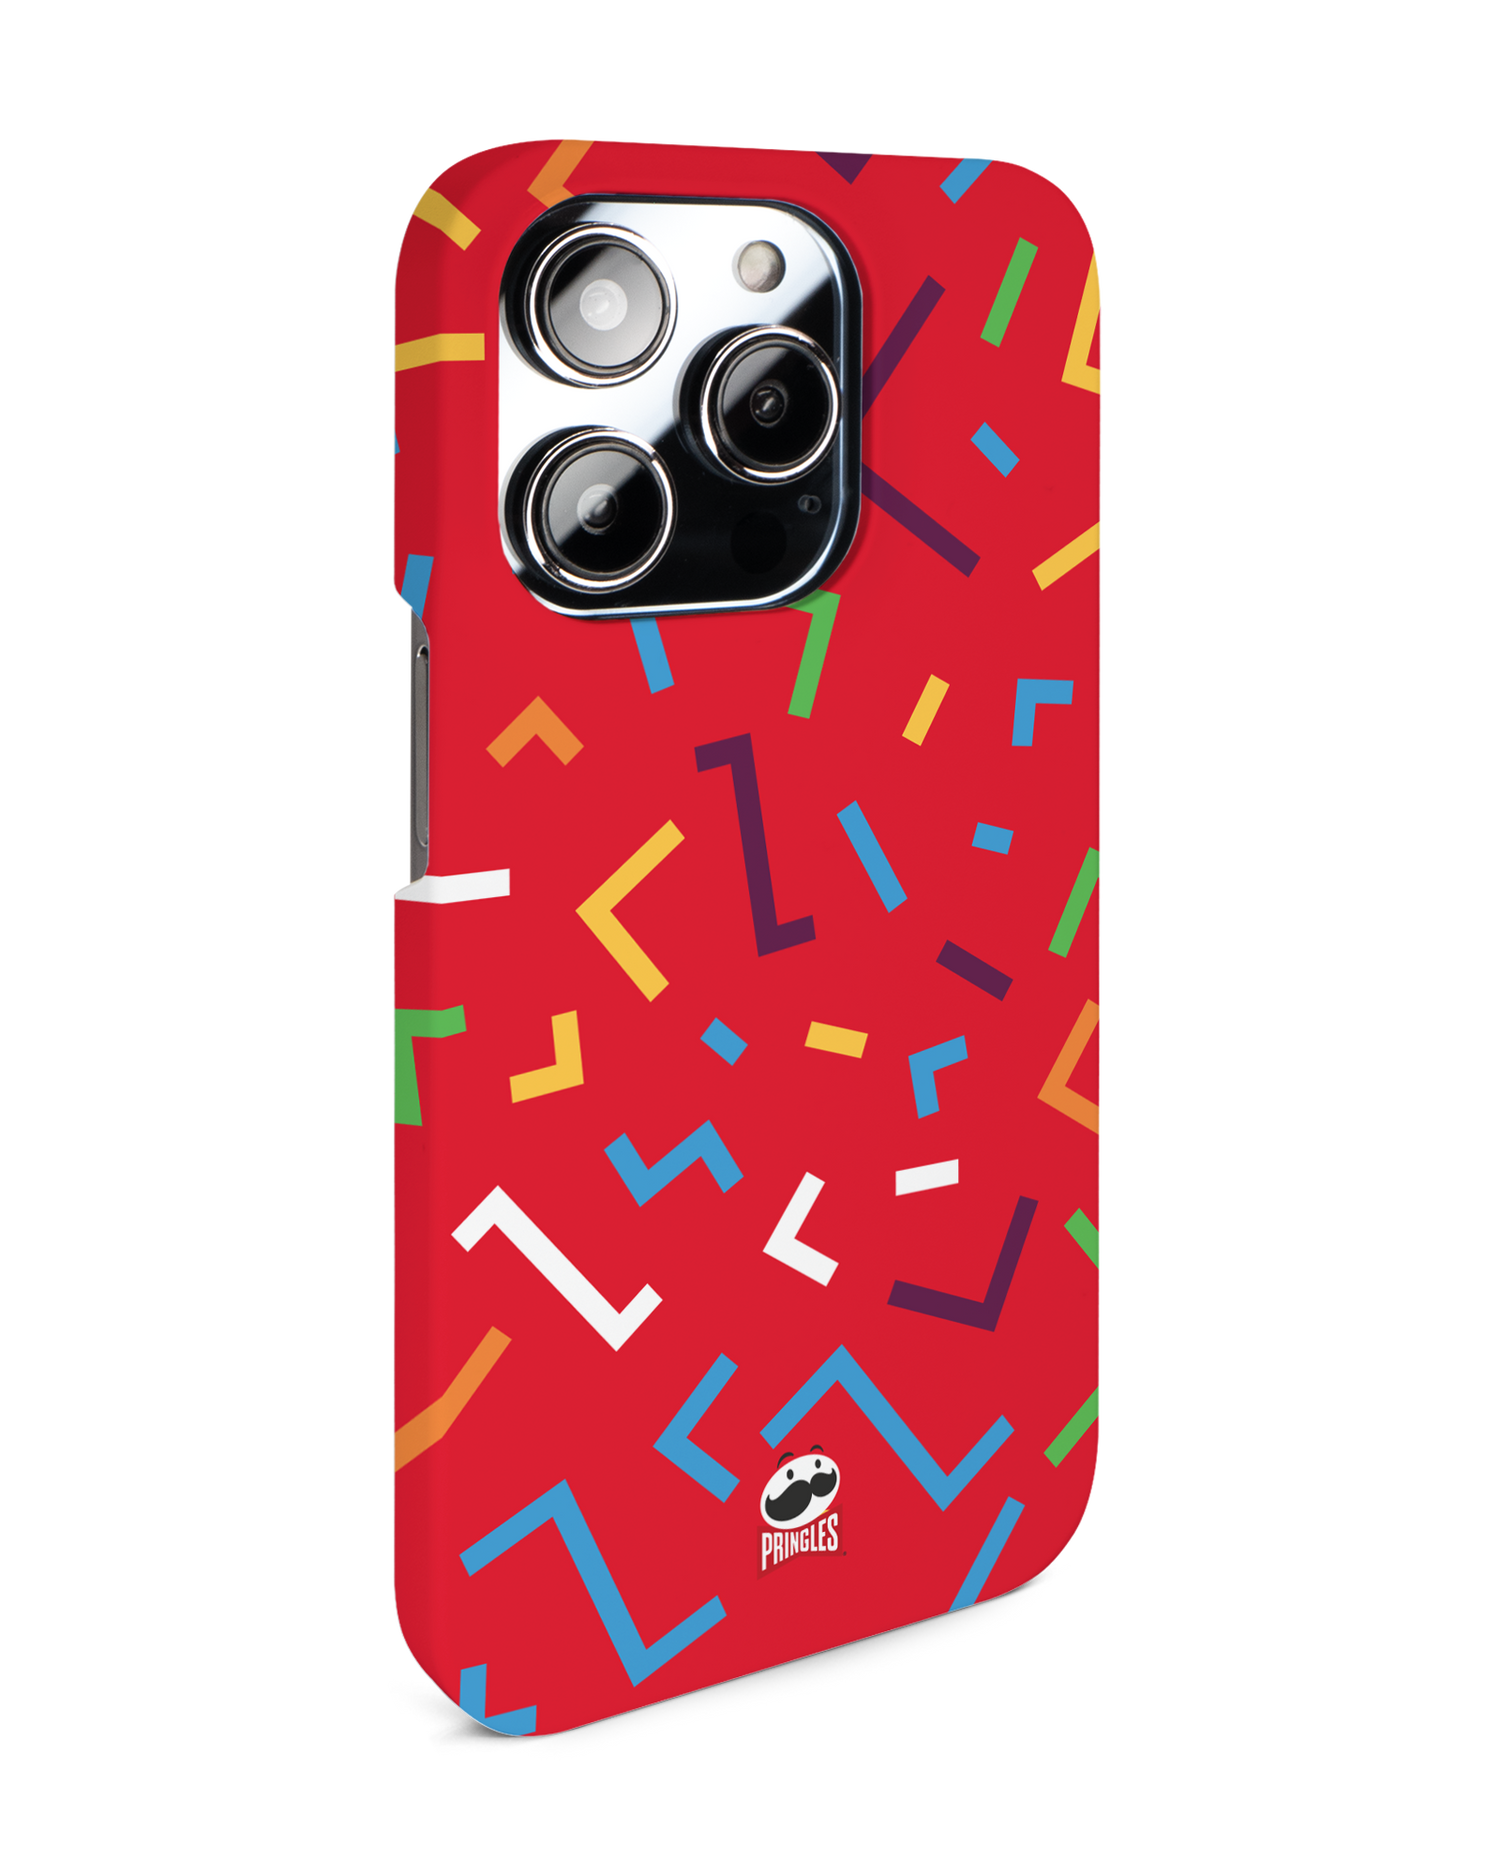 Pringles Confetti Hard Shell Phone Case for Apple iPhone 14 Pro: View from the left side